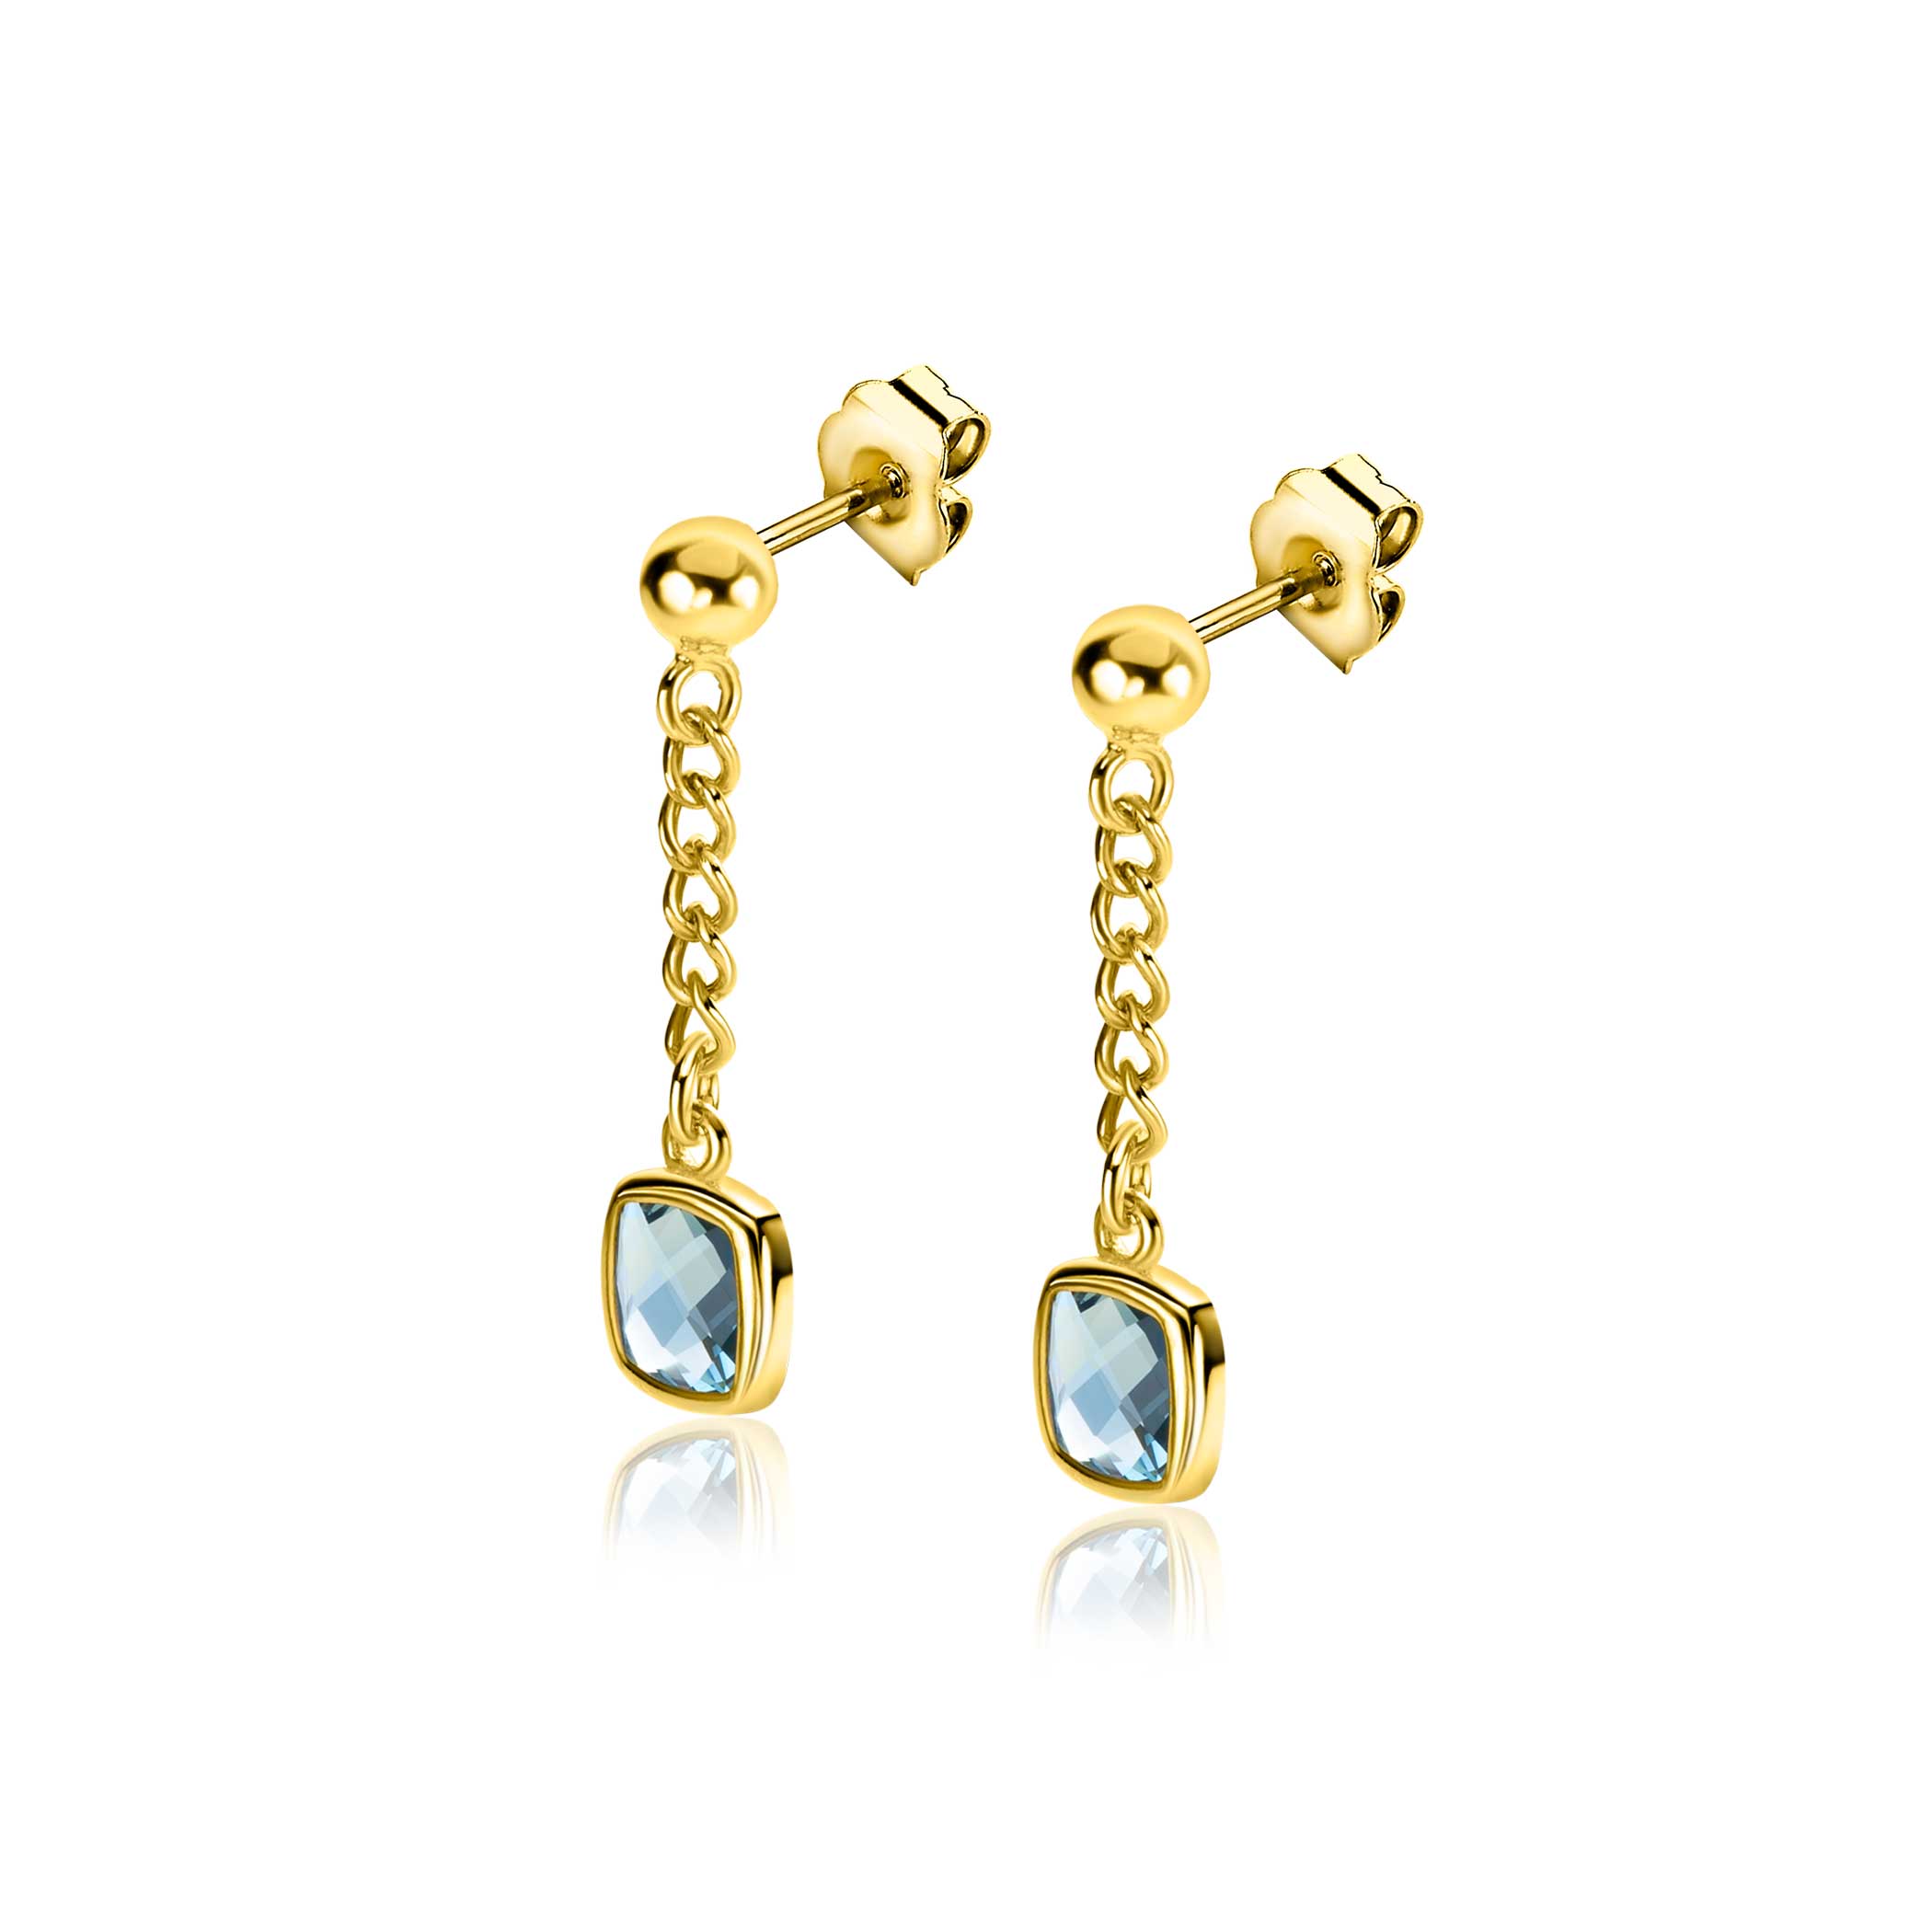 25mm ZINZI Gold Plated Sterling Silver Stud Earrings with Curb Chain and Square Setting with Indigo Blue Color Stone ZIO2417G